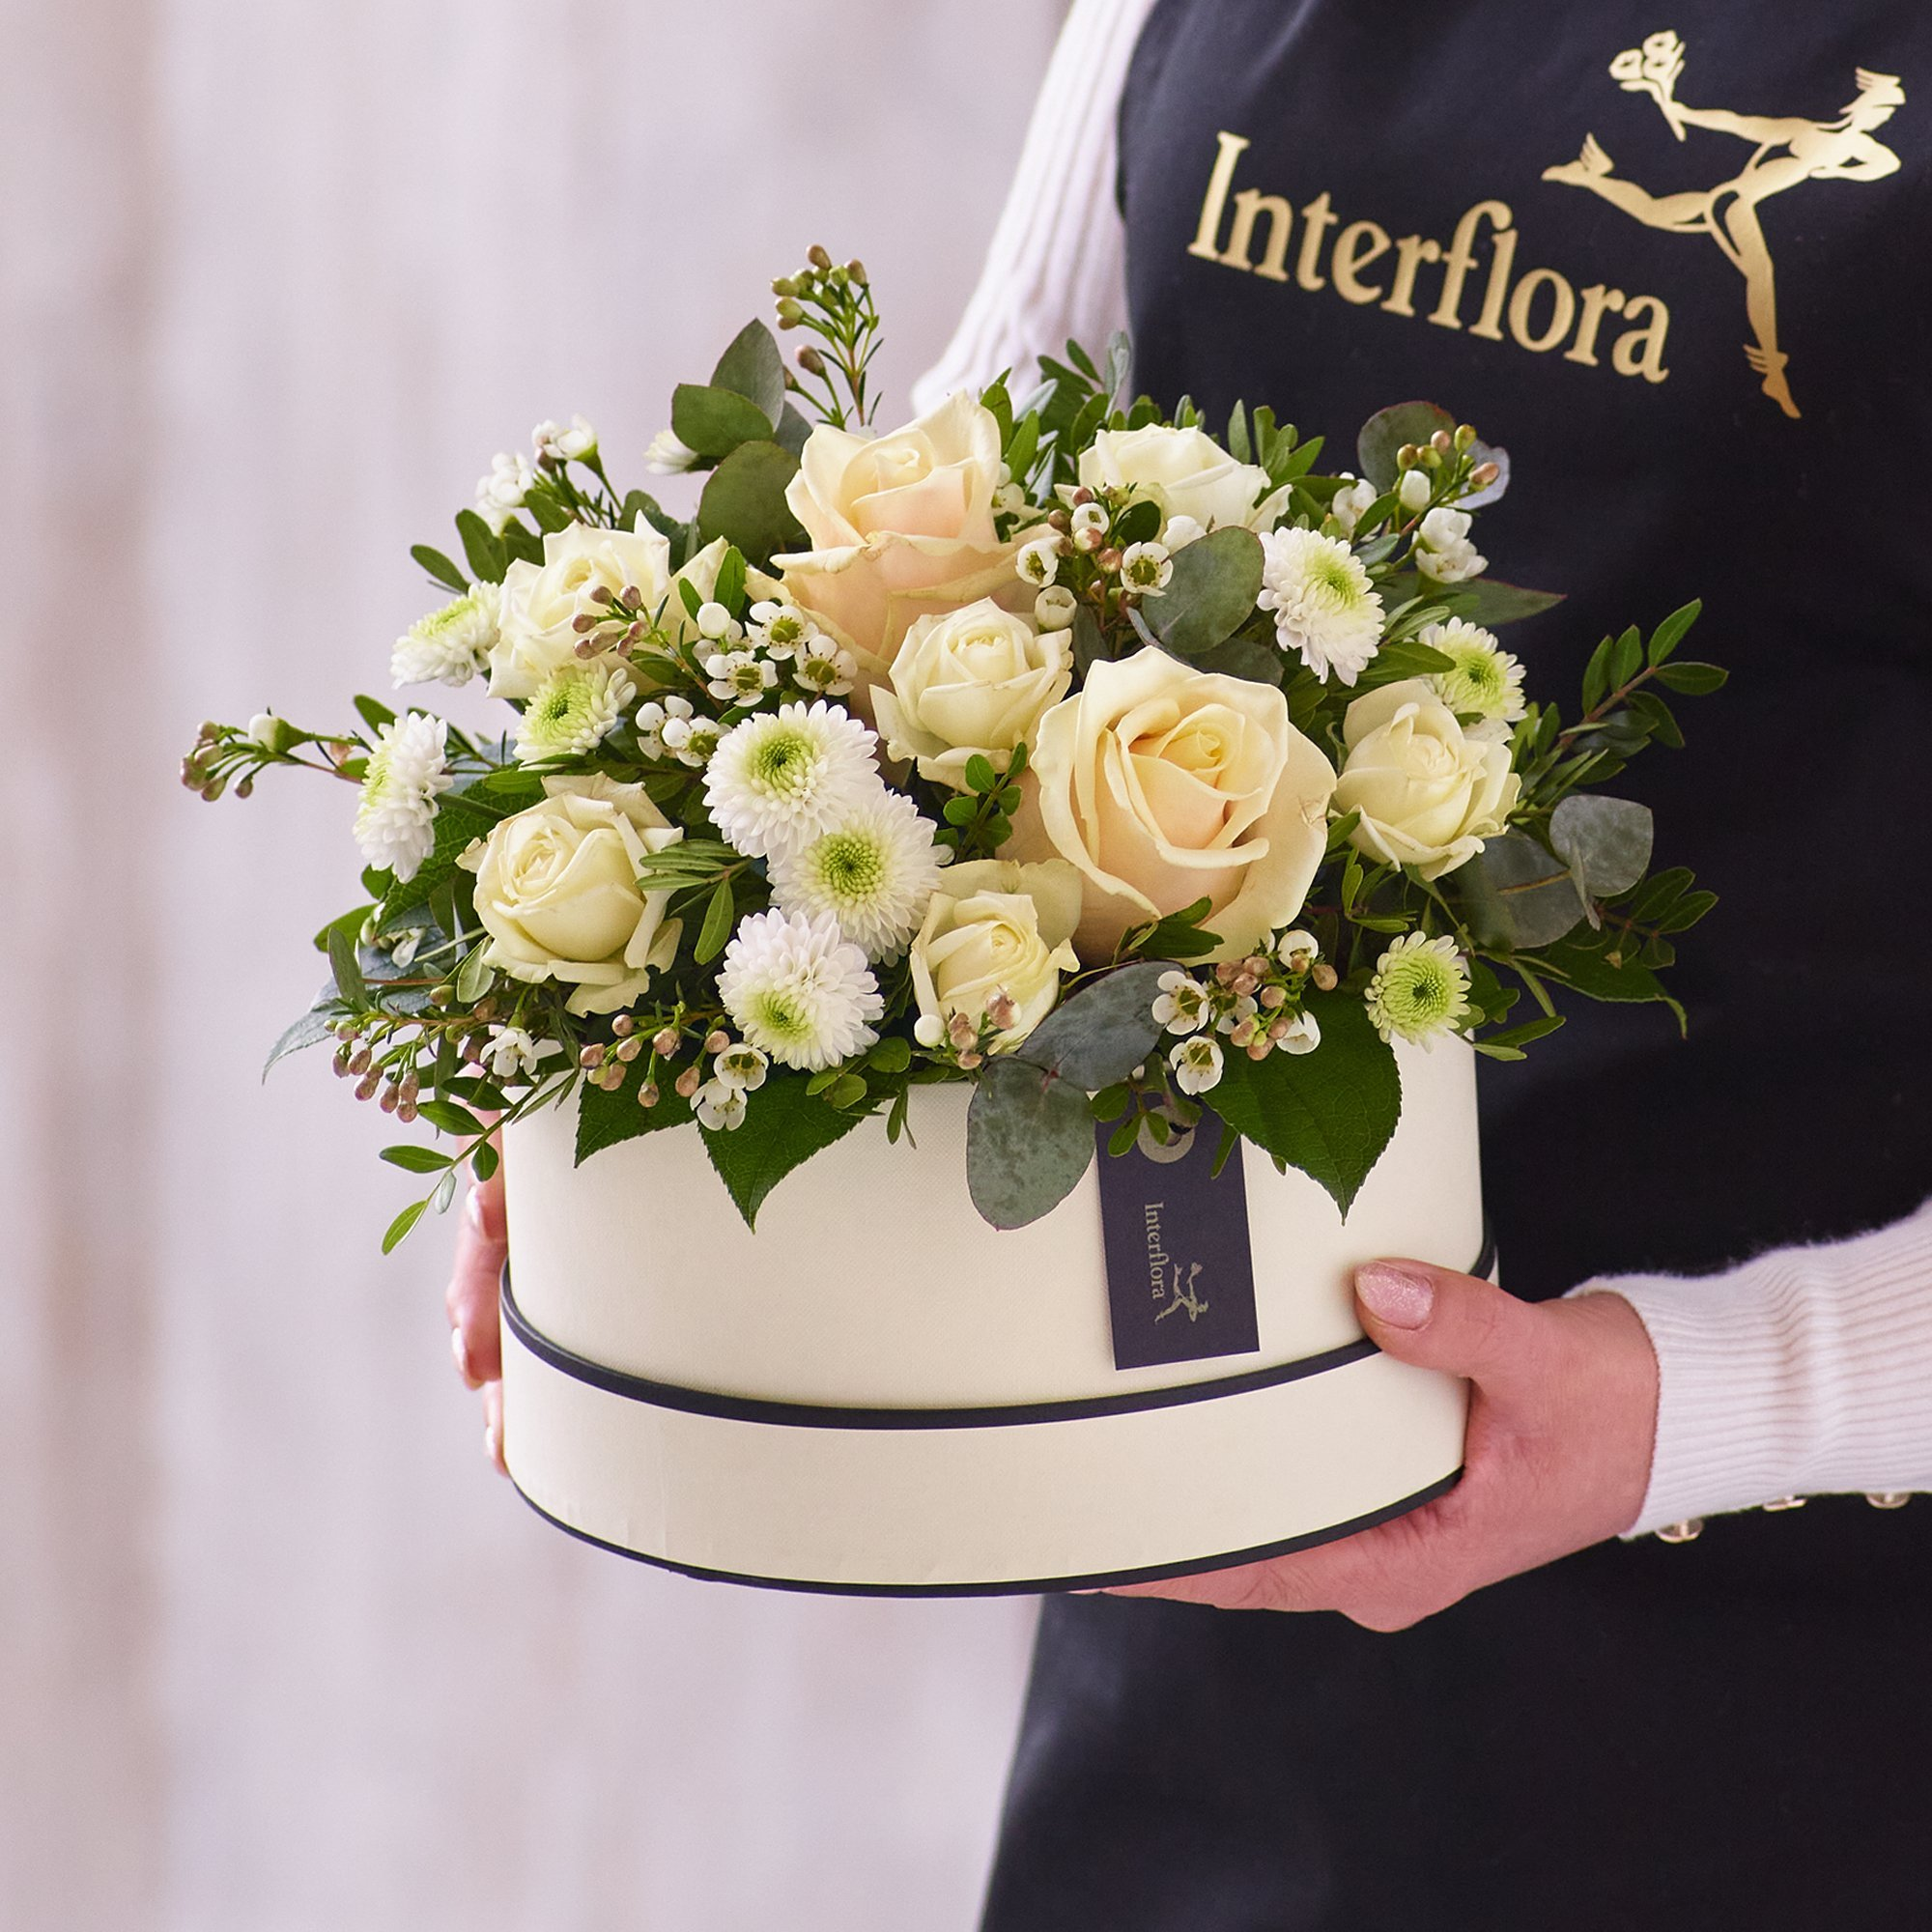 Hatbox made with the Finest Flowers